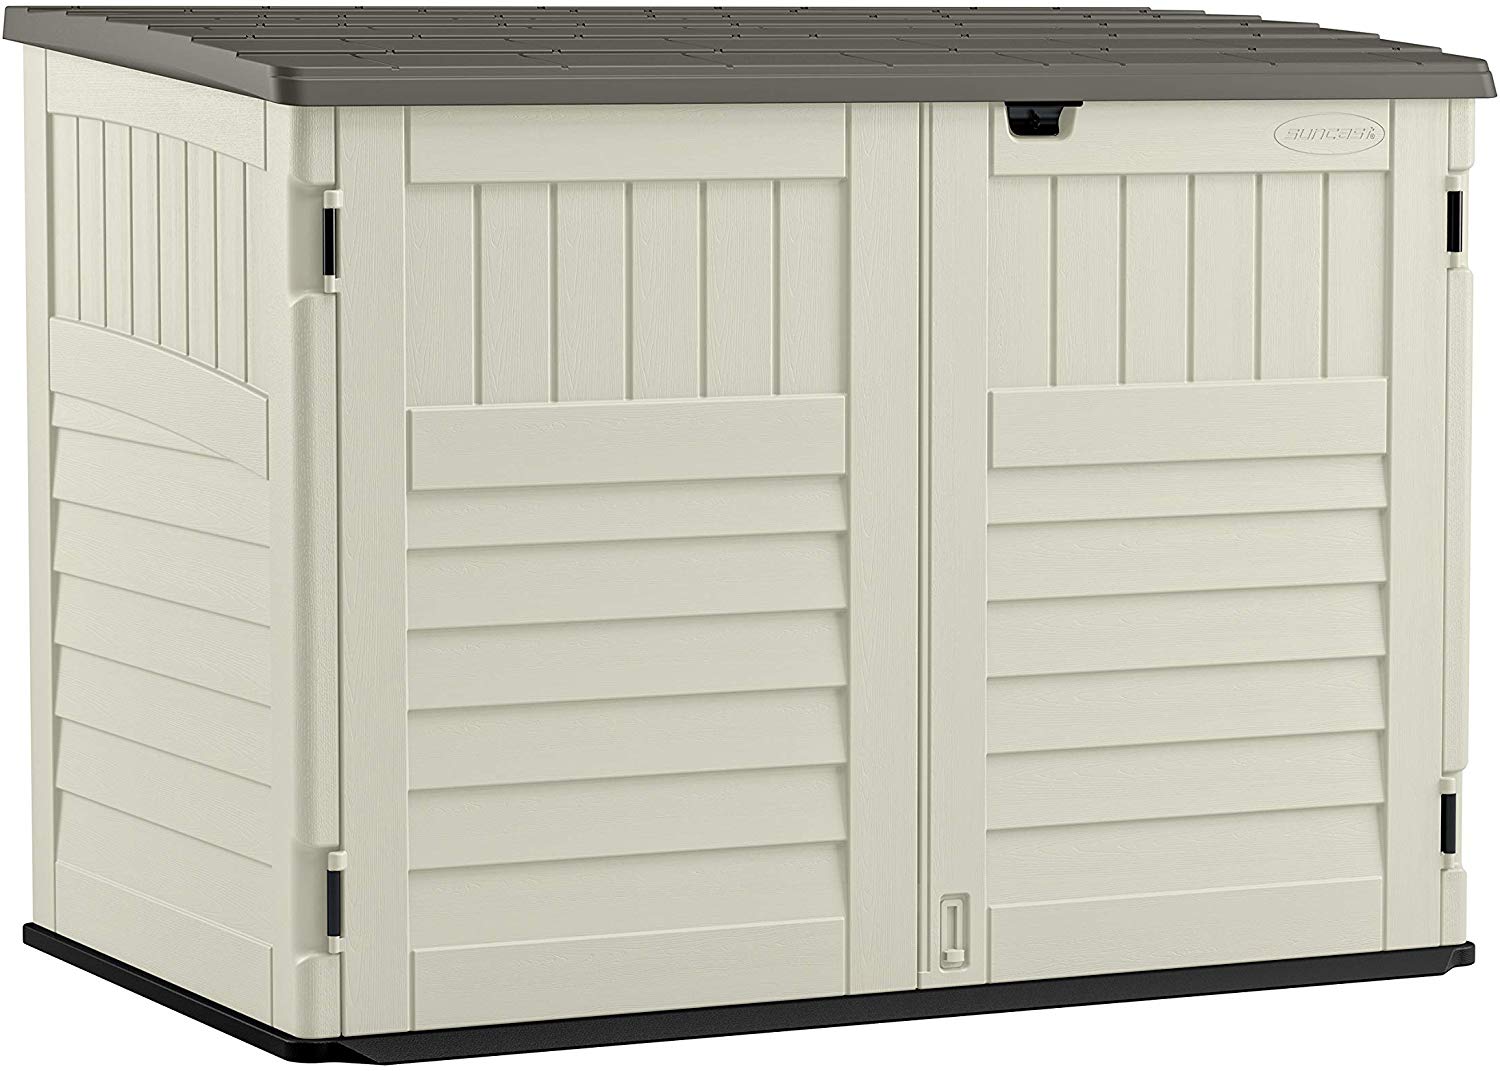 Review of Suncast 5' x 3' Horizontal Stow-Away Storage Shed - Natural Wood-like Outdoor Storage